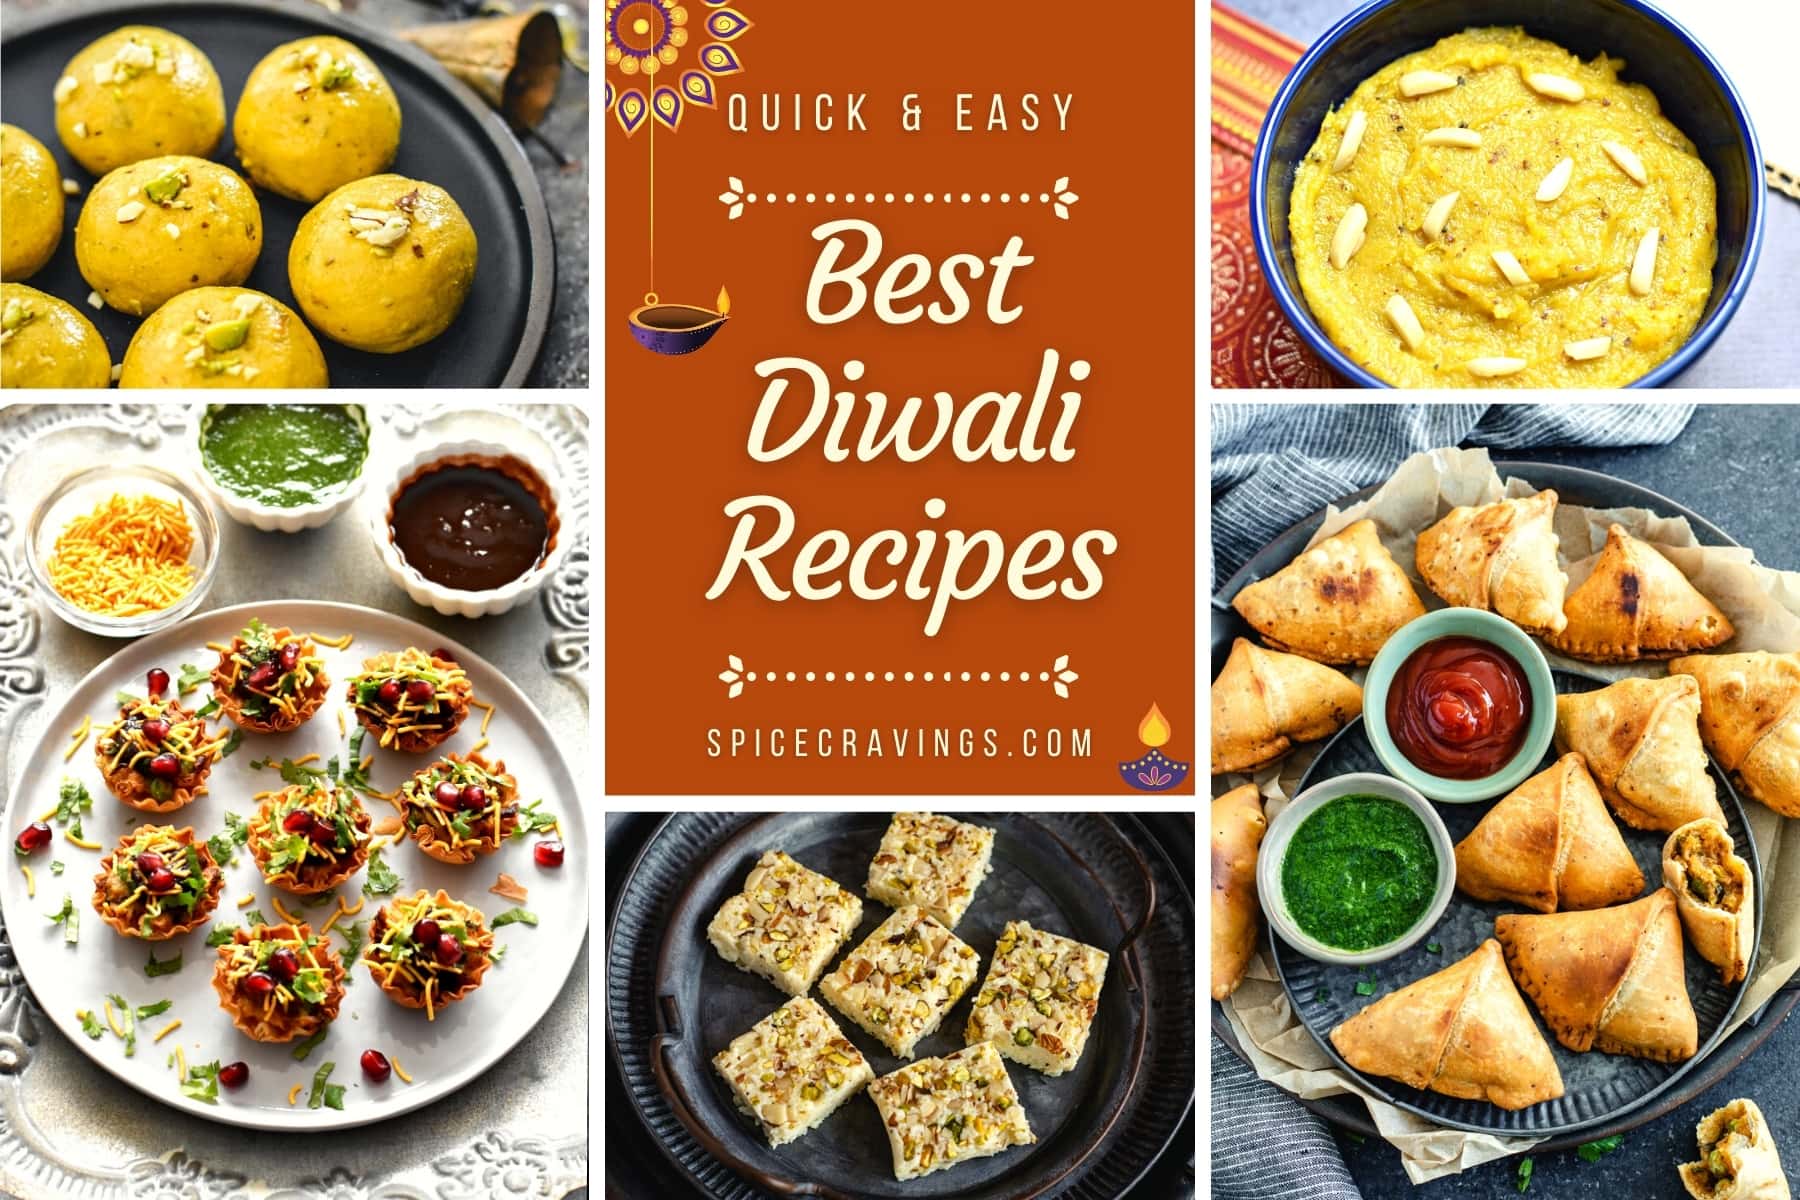 Collage of Indian recipes with banner reading "Best Diwali Recipes"